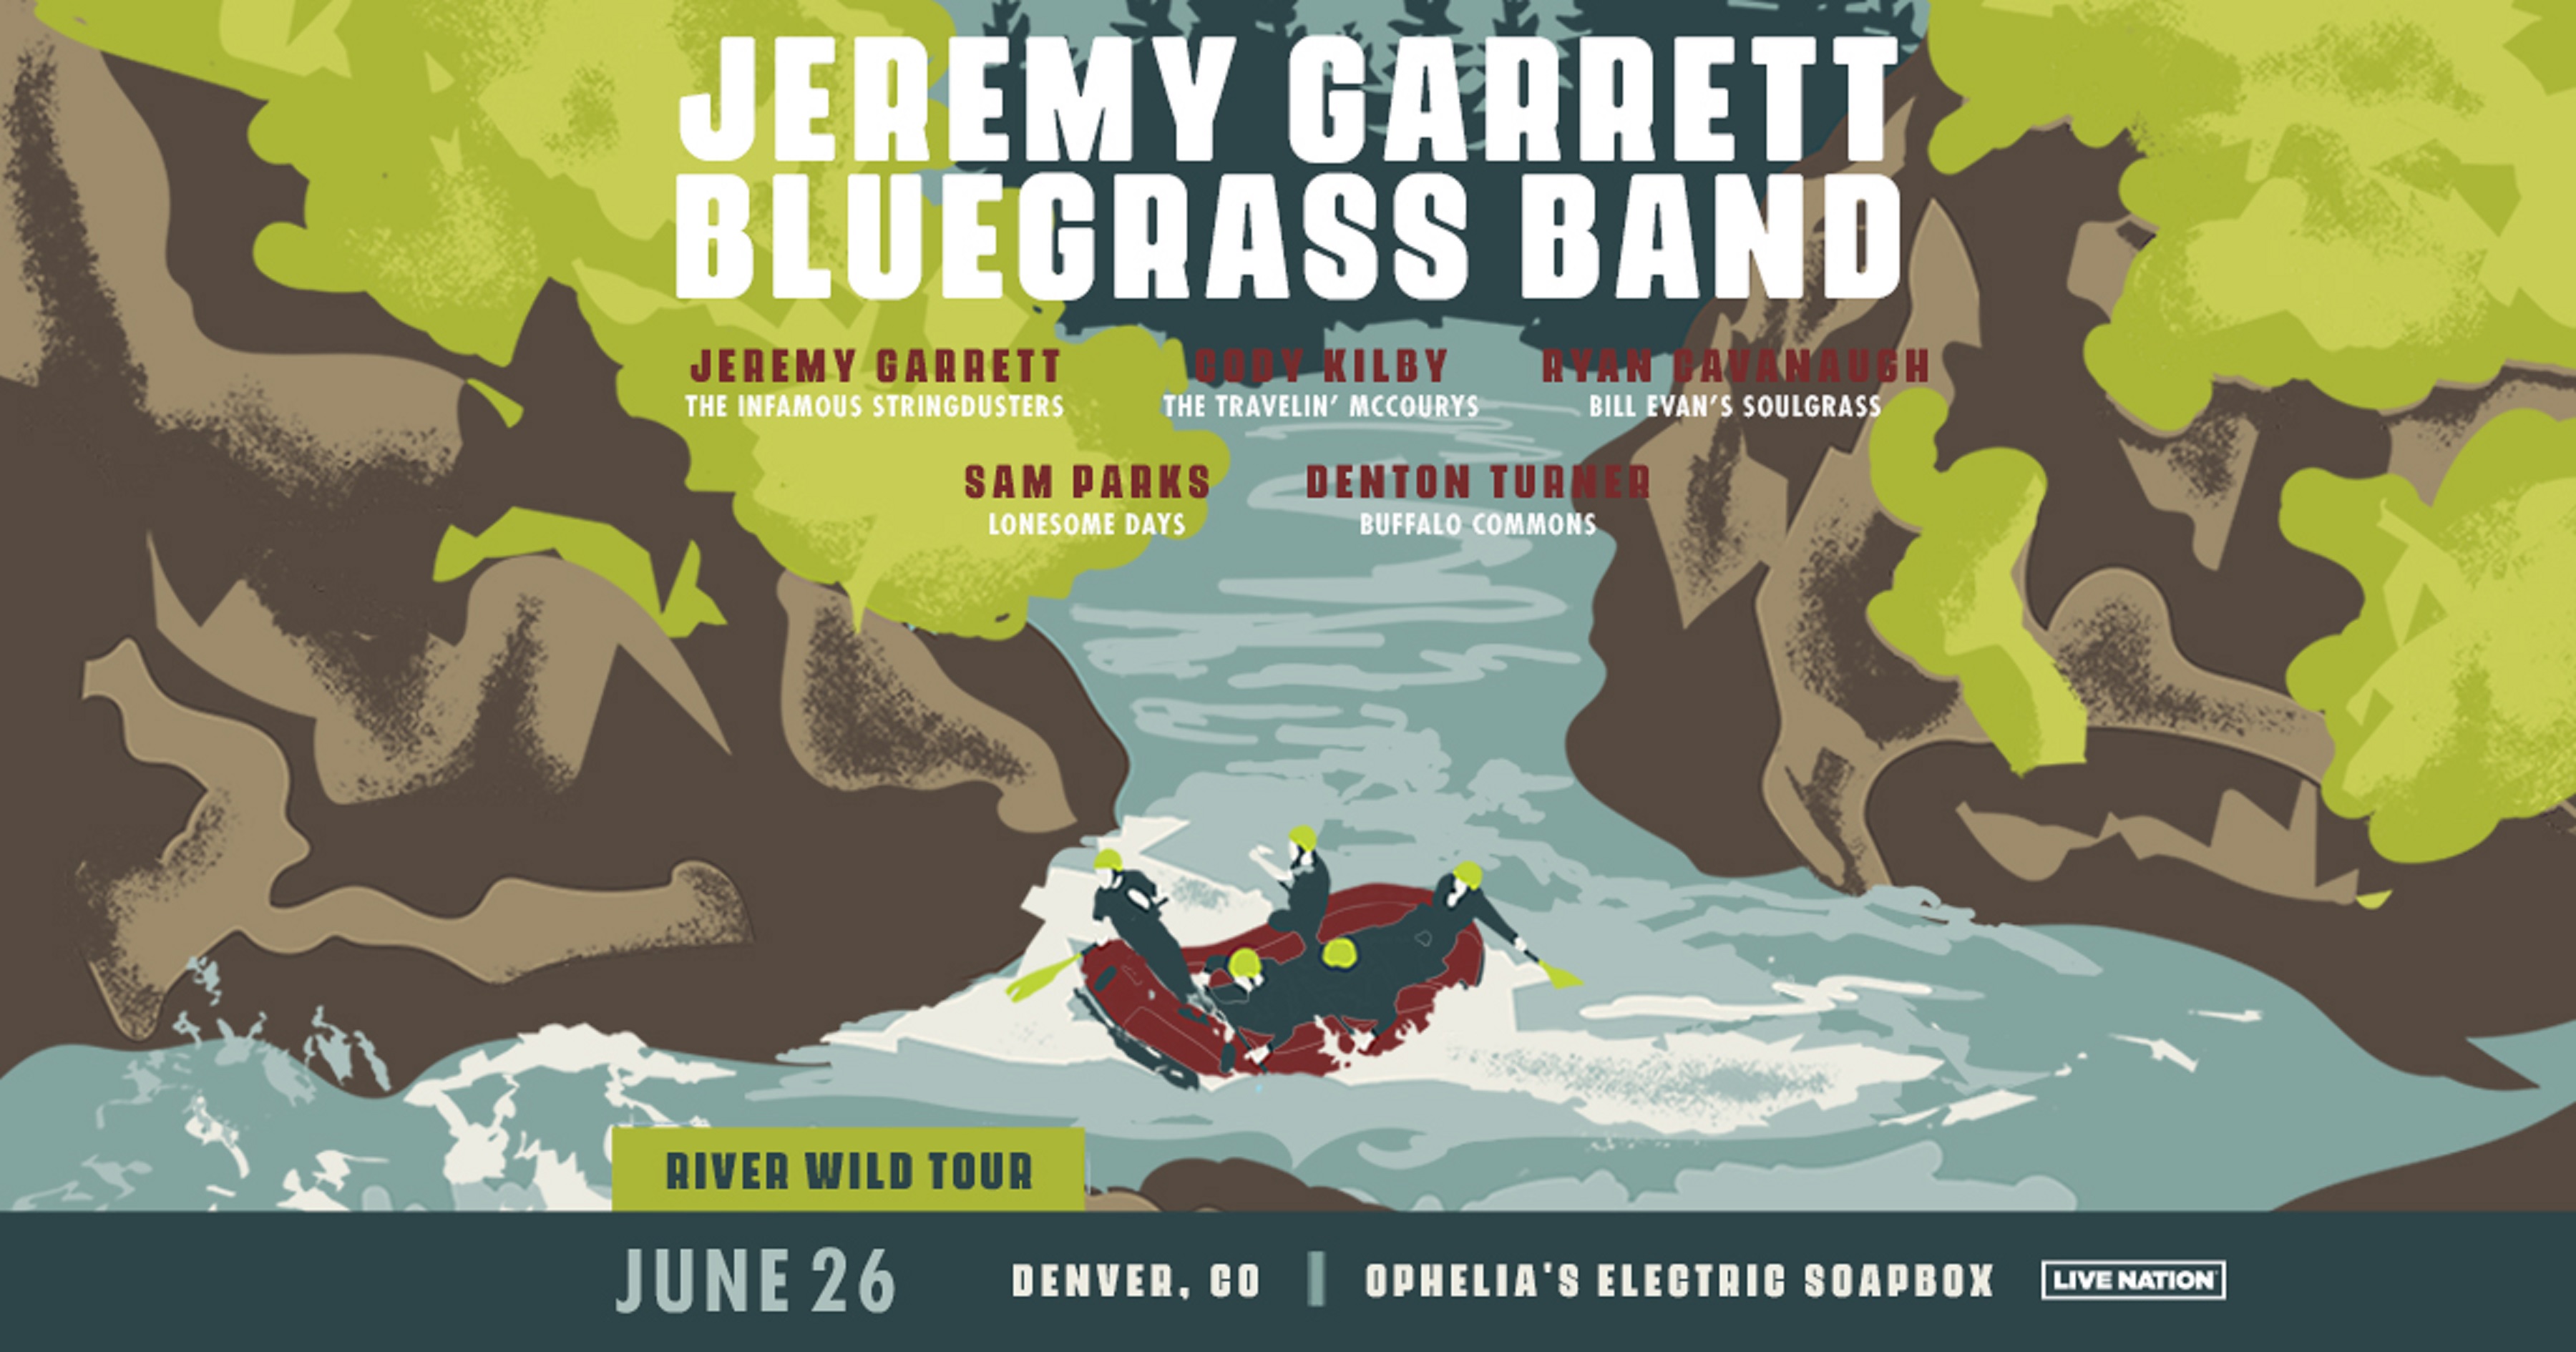 Jeremy Garrett, Fiddle Player from the Infamous Stringdusters, Brings Solo Project to Denver